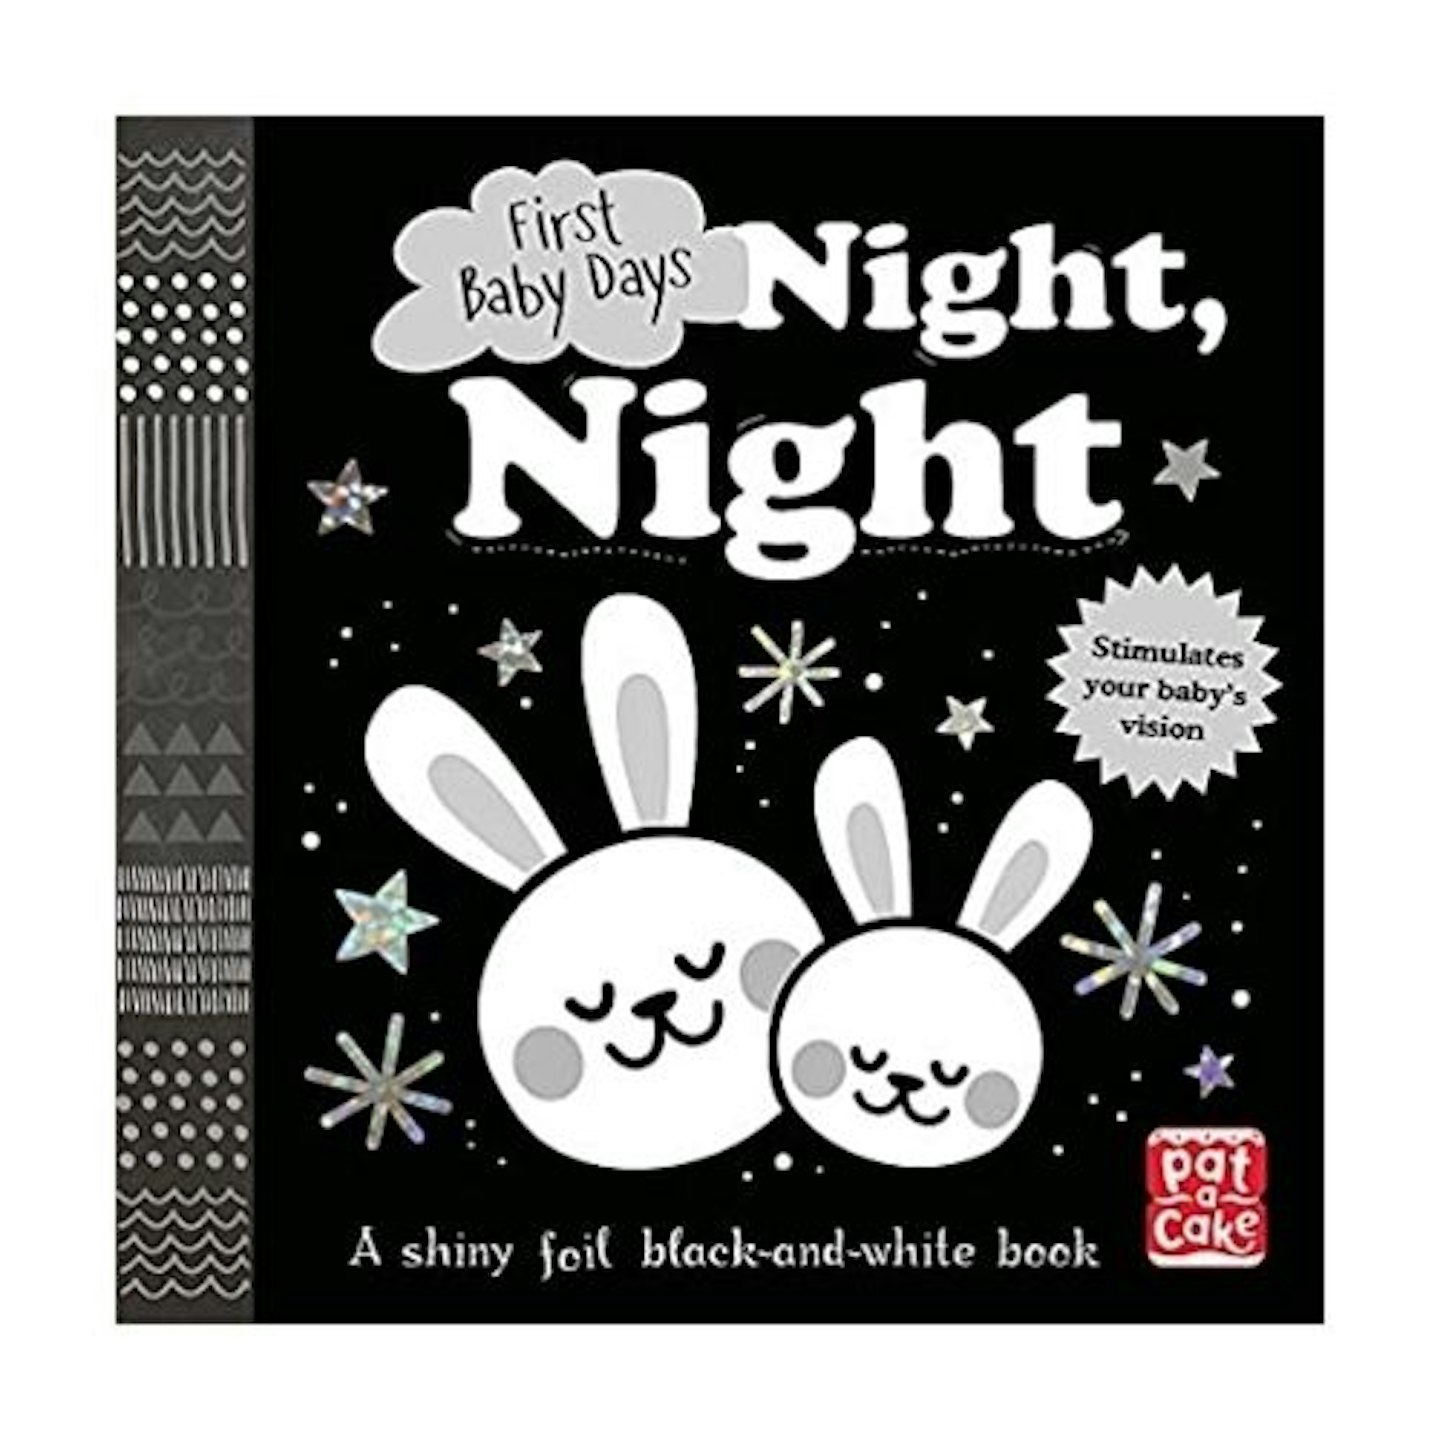 Night, Night: A touch-and-feel board book for your baby to explore